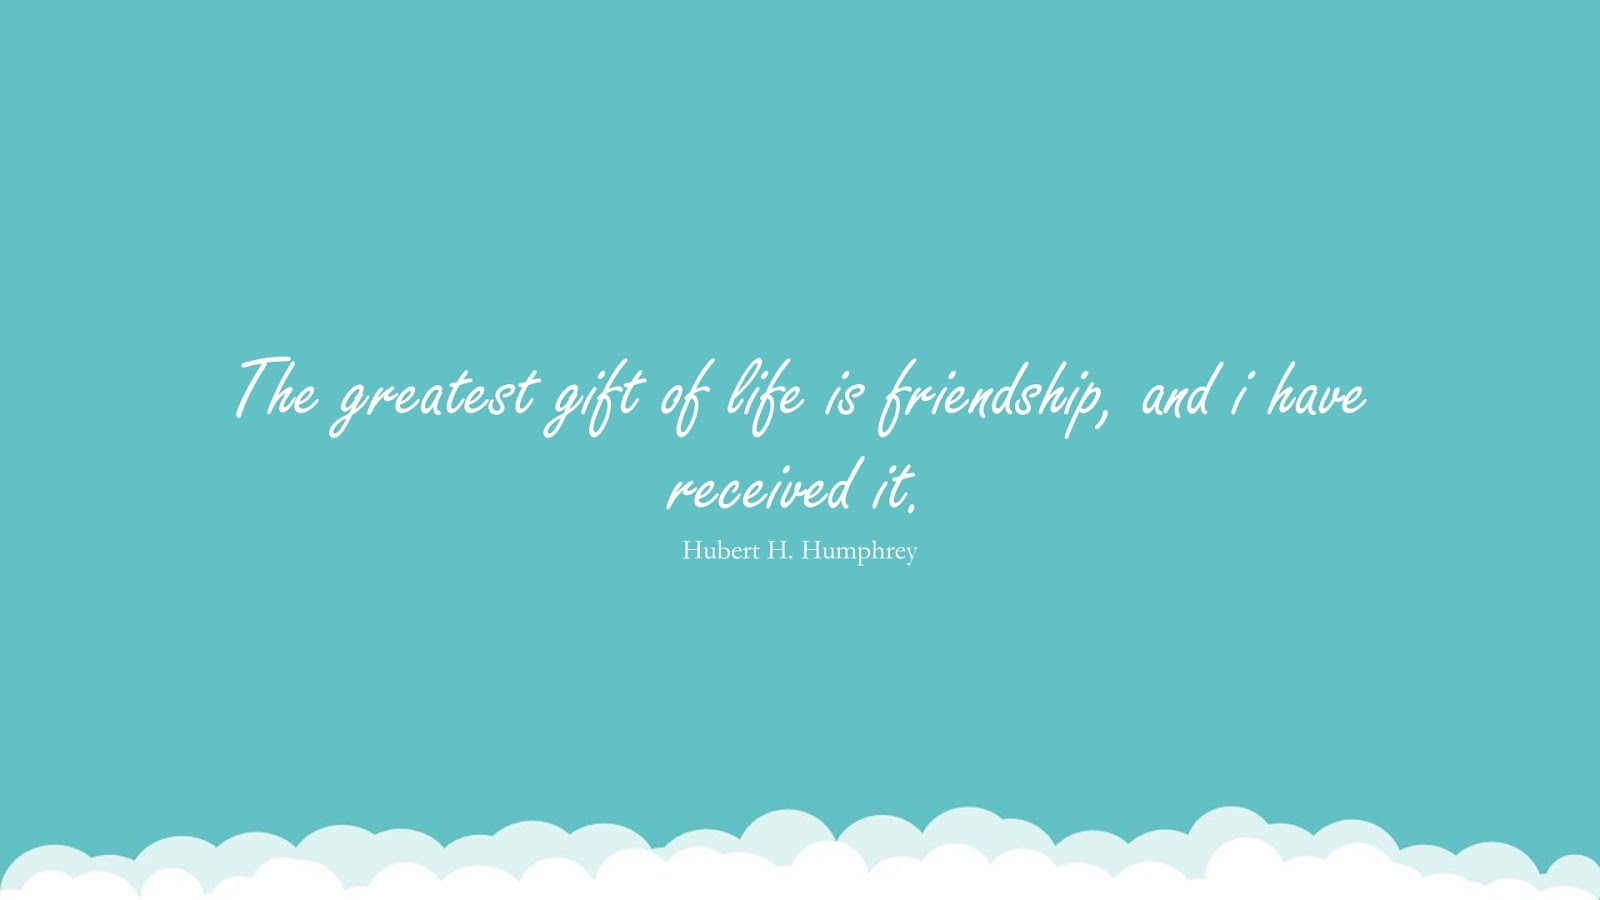 The greatest gift of life is friendship, and i have received it. (Hubert H. Humphrey);  #LifeQuotes